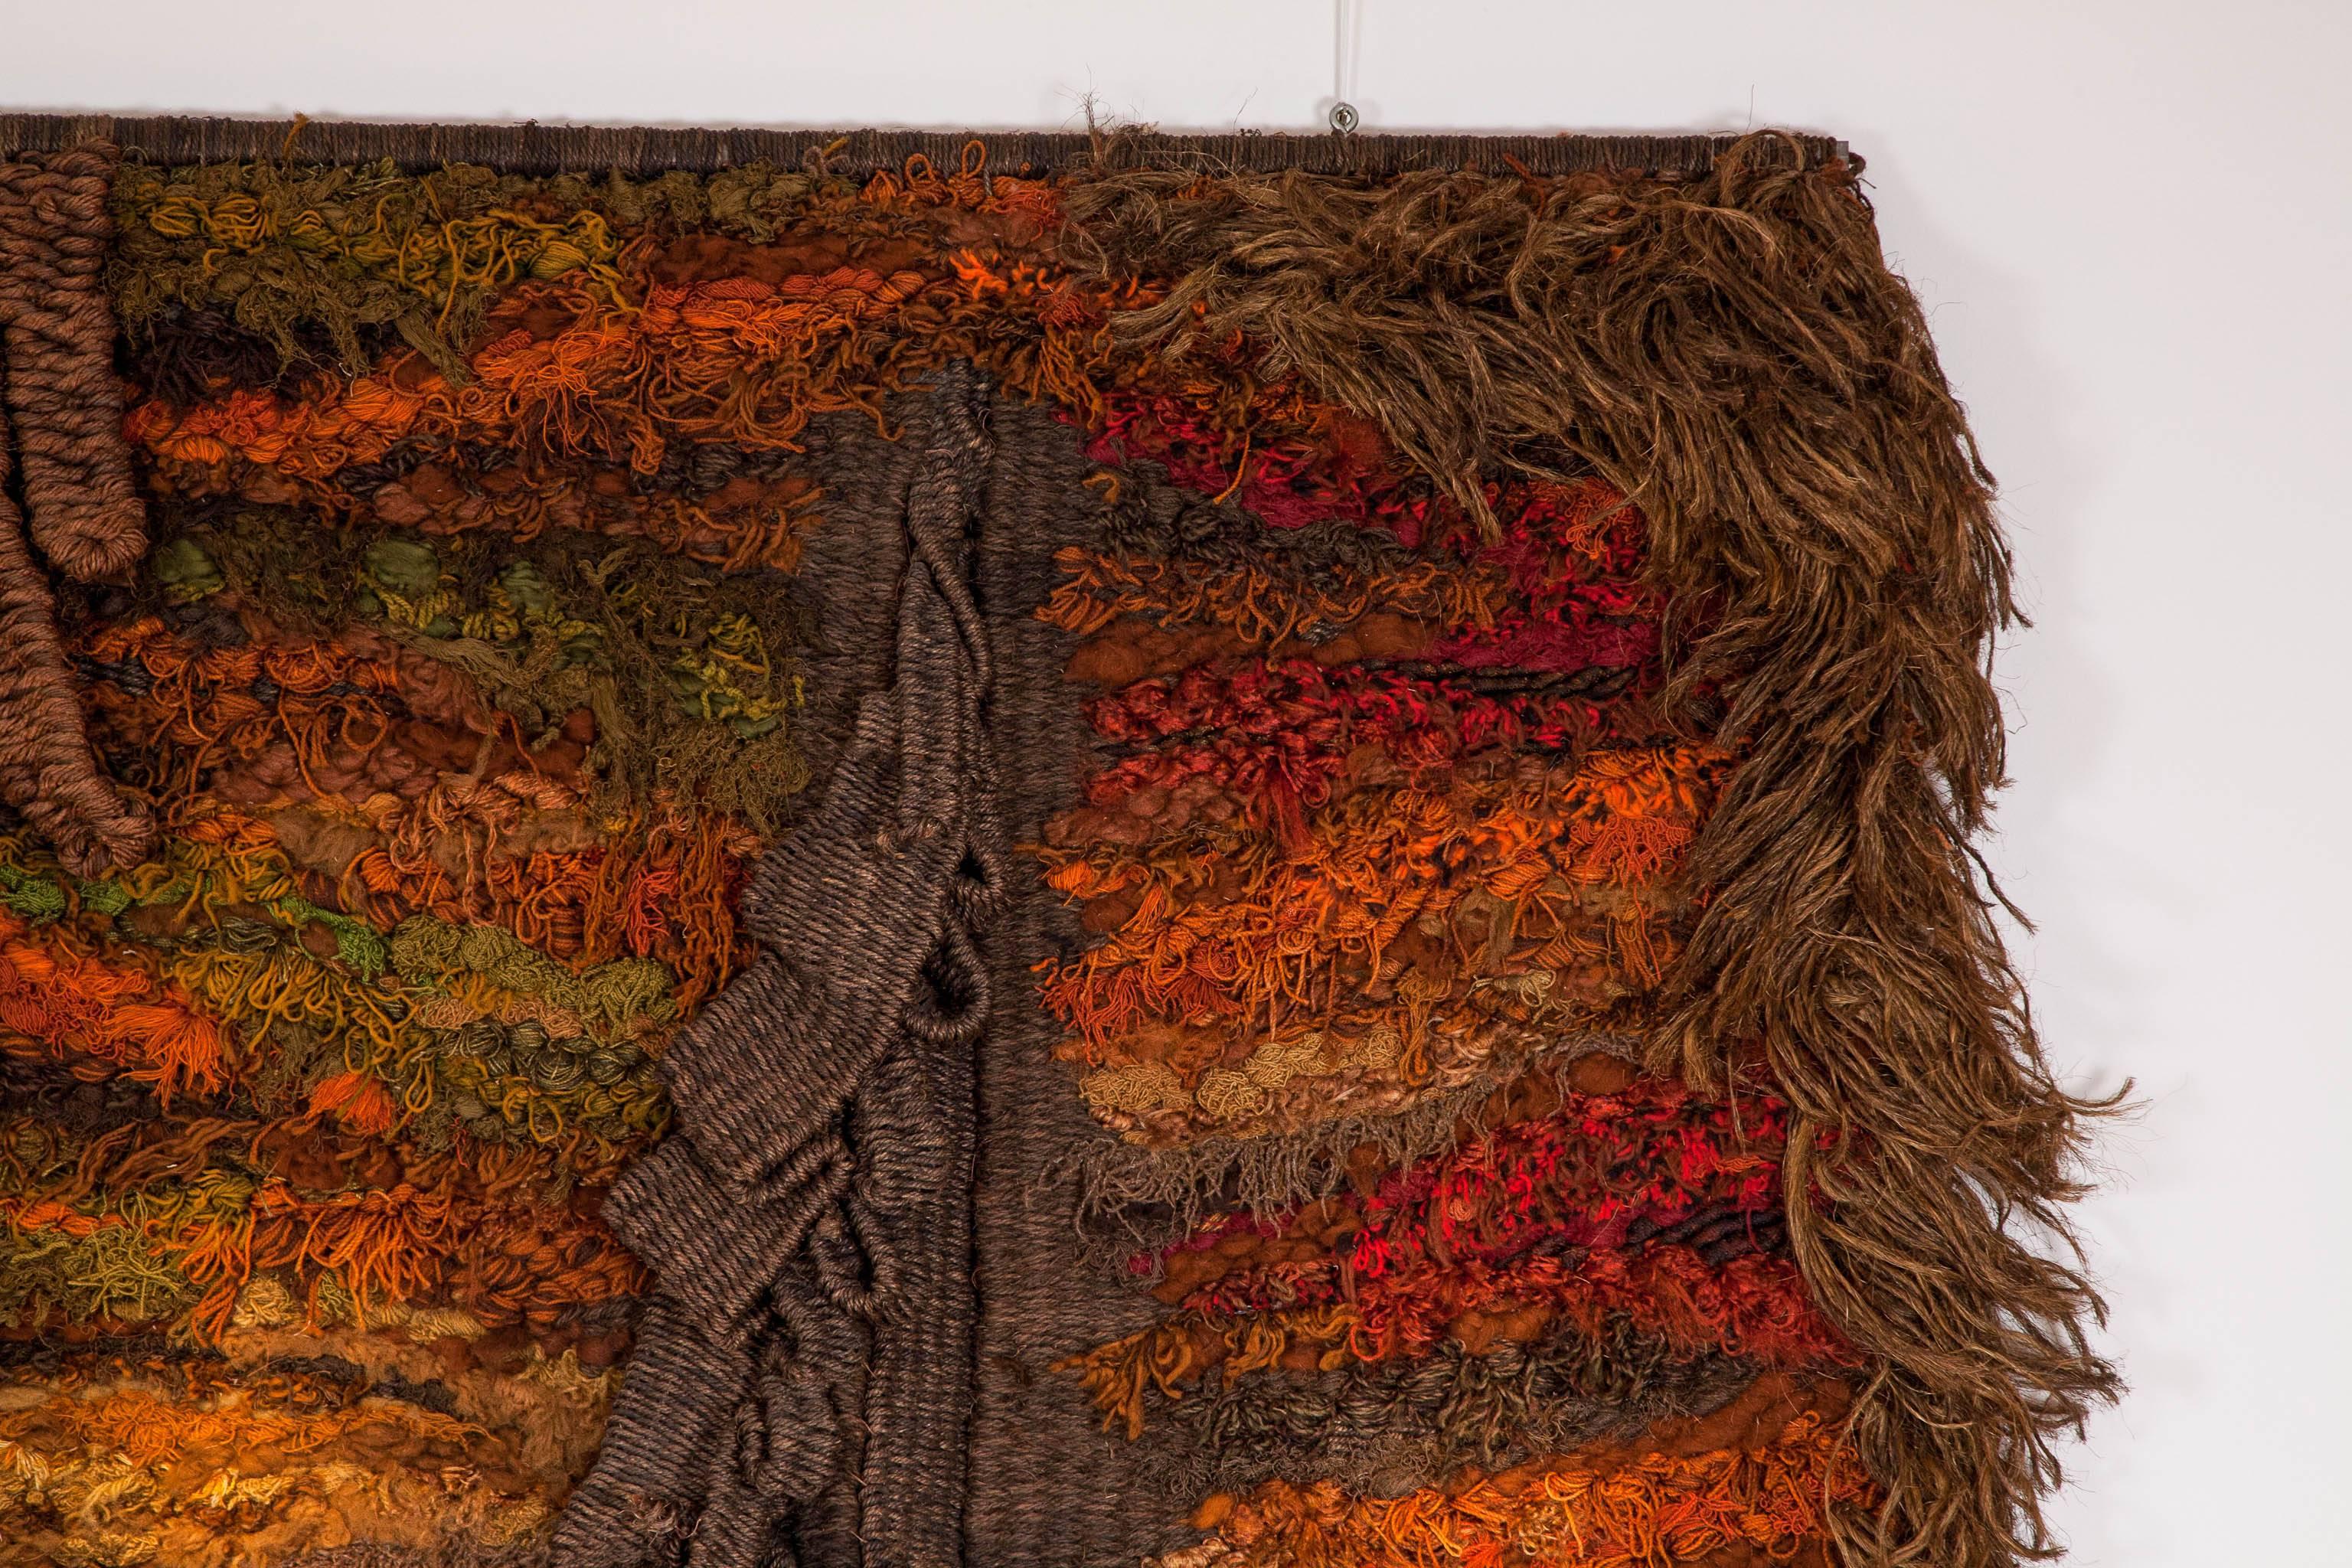 'Noyau' (Nucleus) tapestry by Veerle Dupont (b. 1942, Belgian), 1979.
Mixed natural fibres are woven in abstract, sculptural design. Various weaving techniques were employed to enhance the effects of the different materials, resulting in a unique